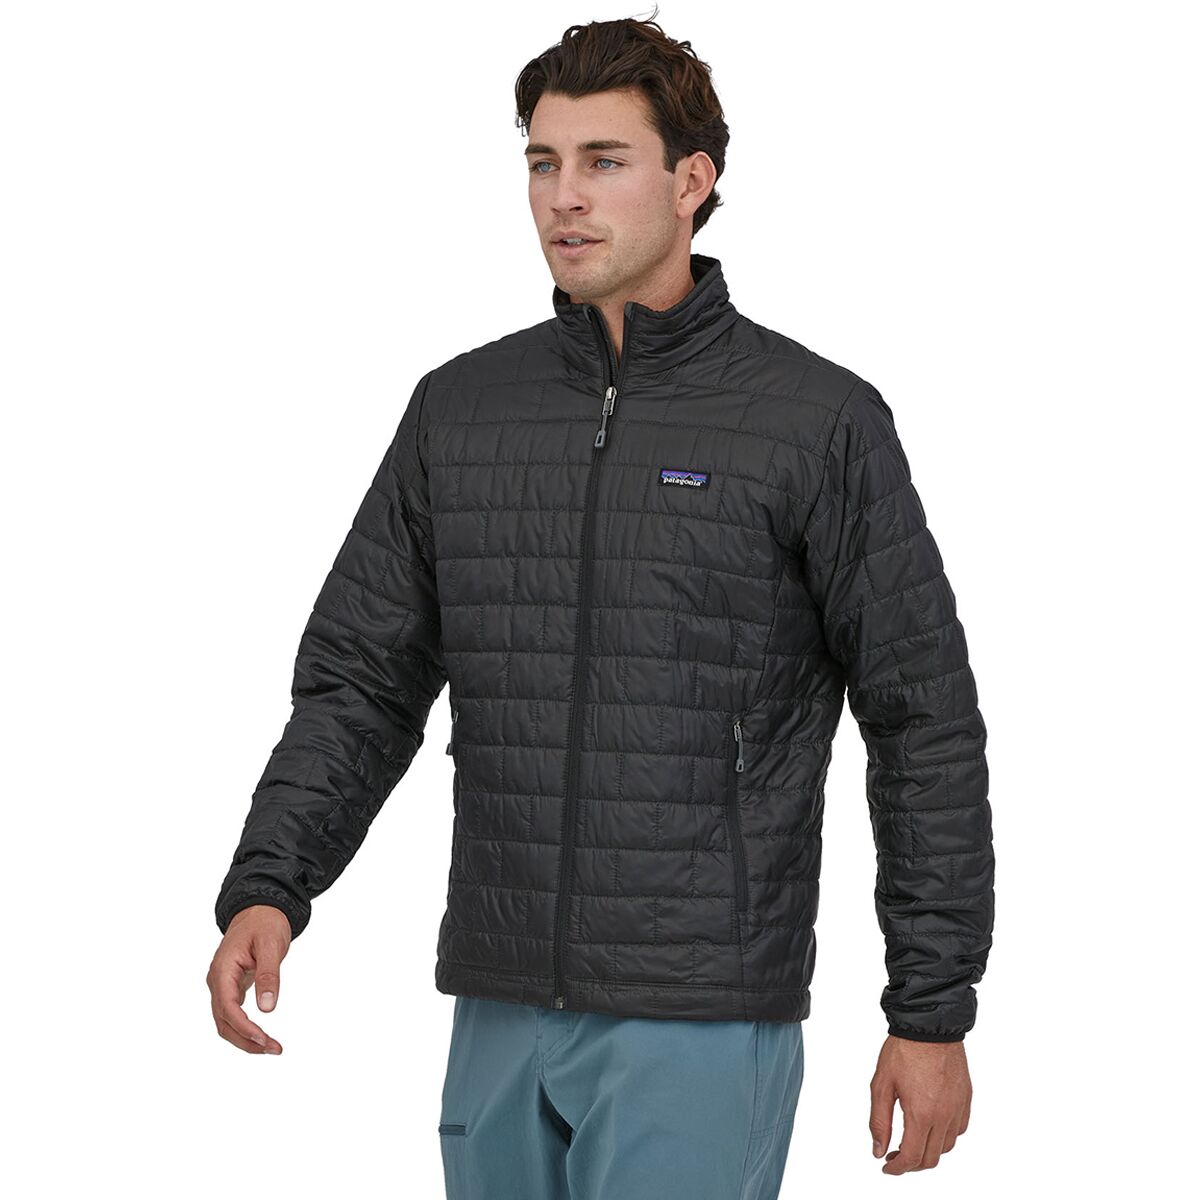 Patagonia Nano Puff Insulated Jacket - Men's | Backcountry